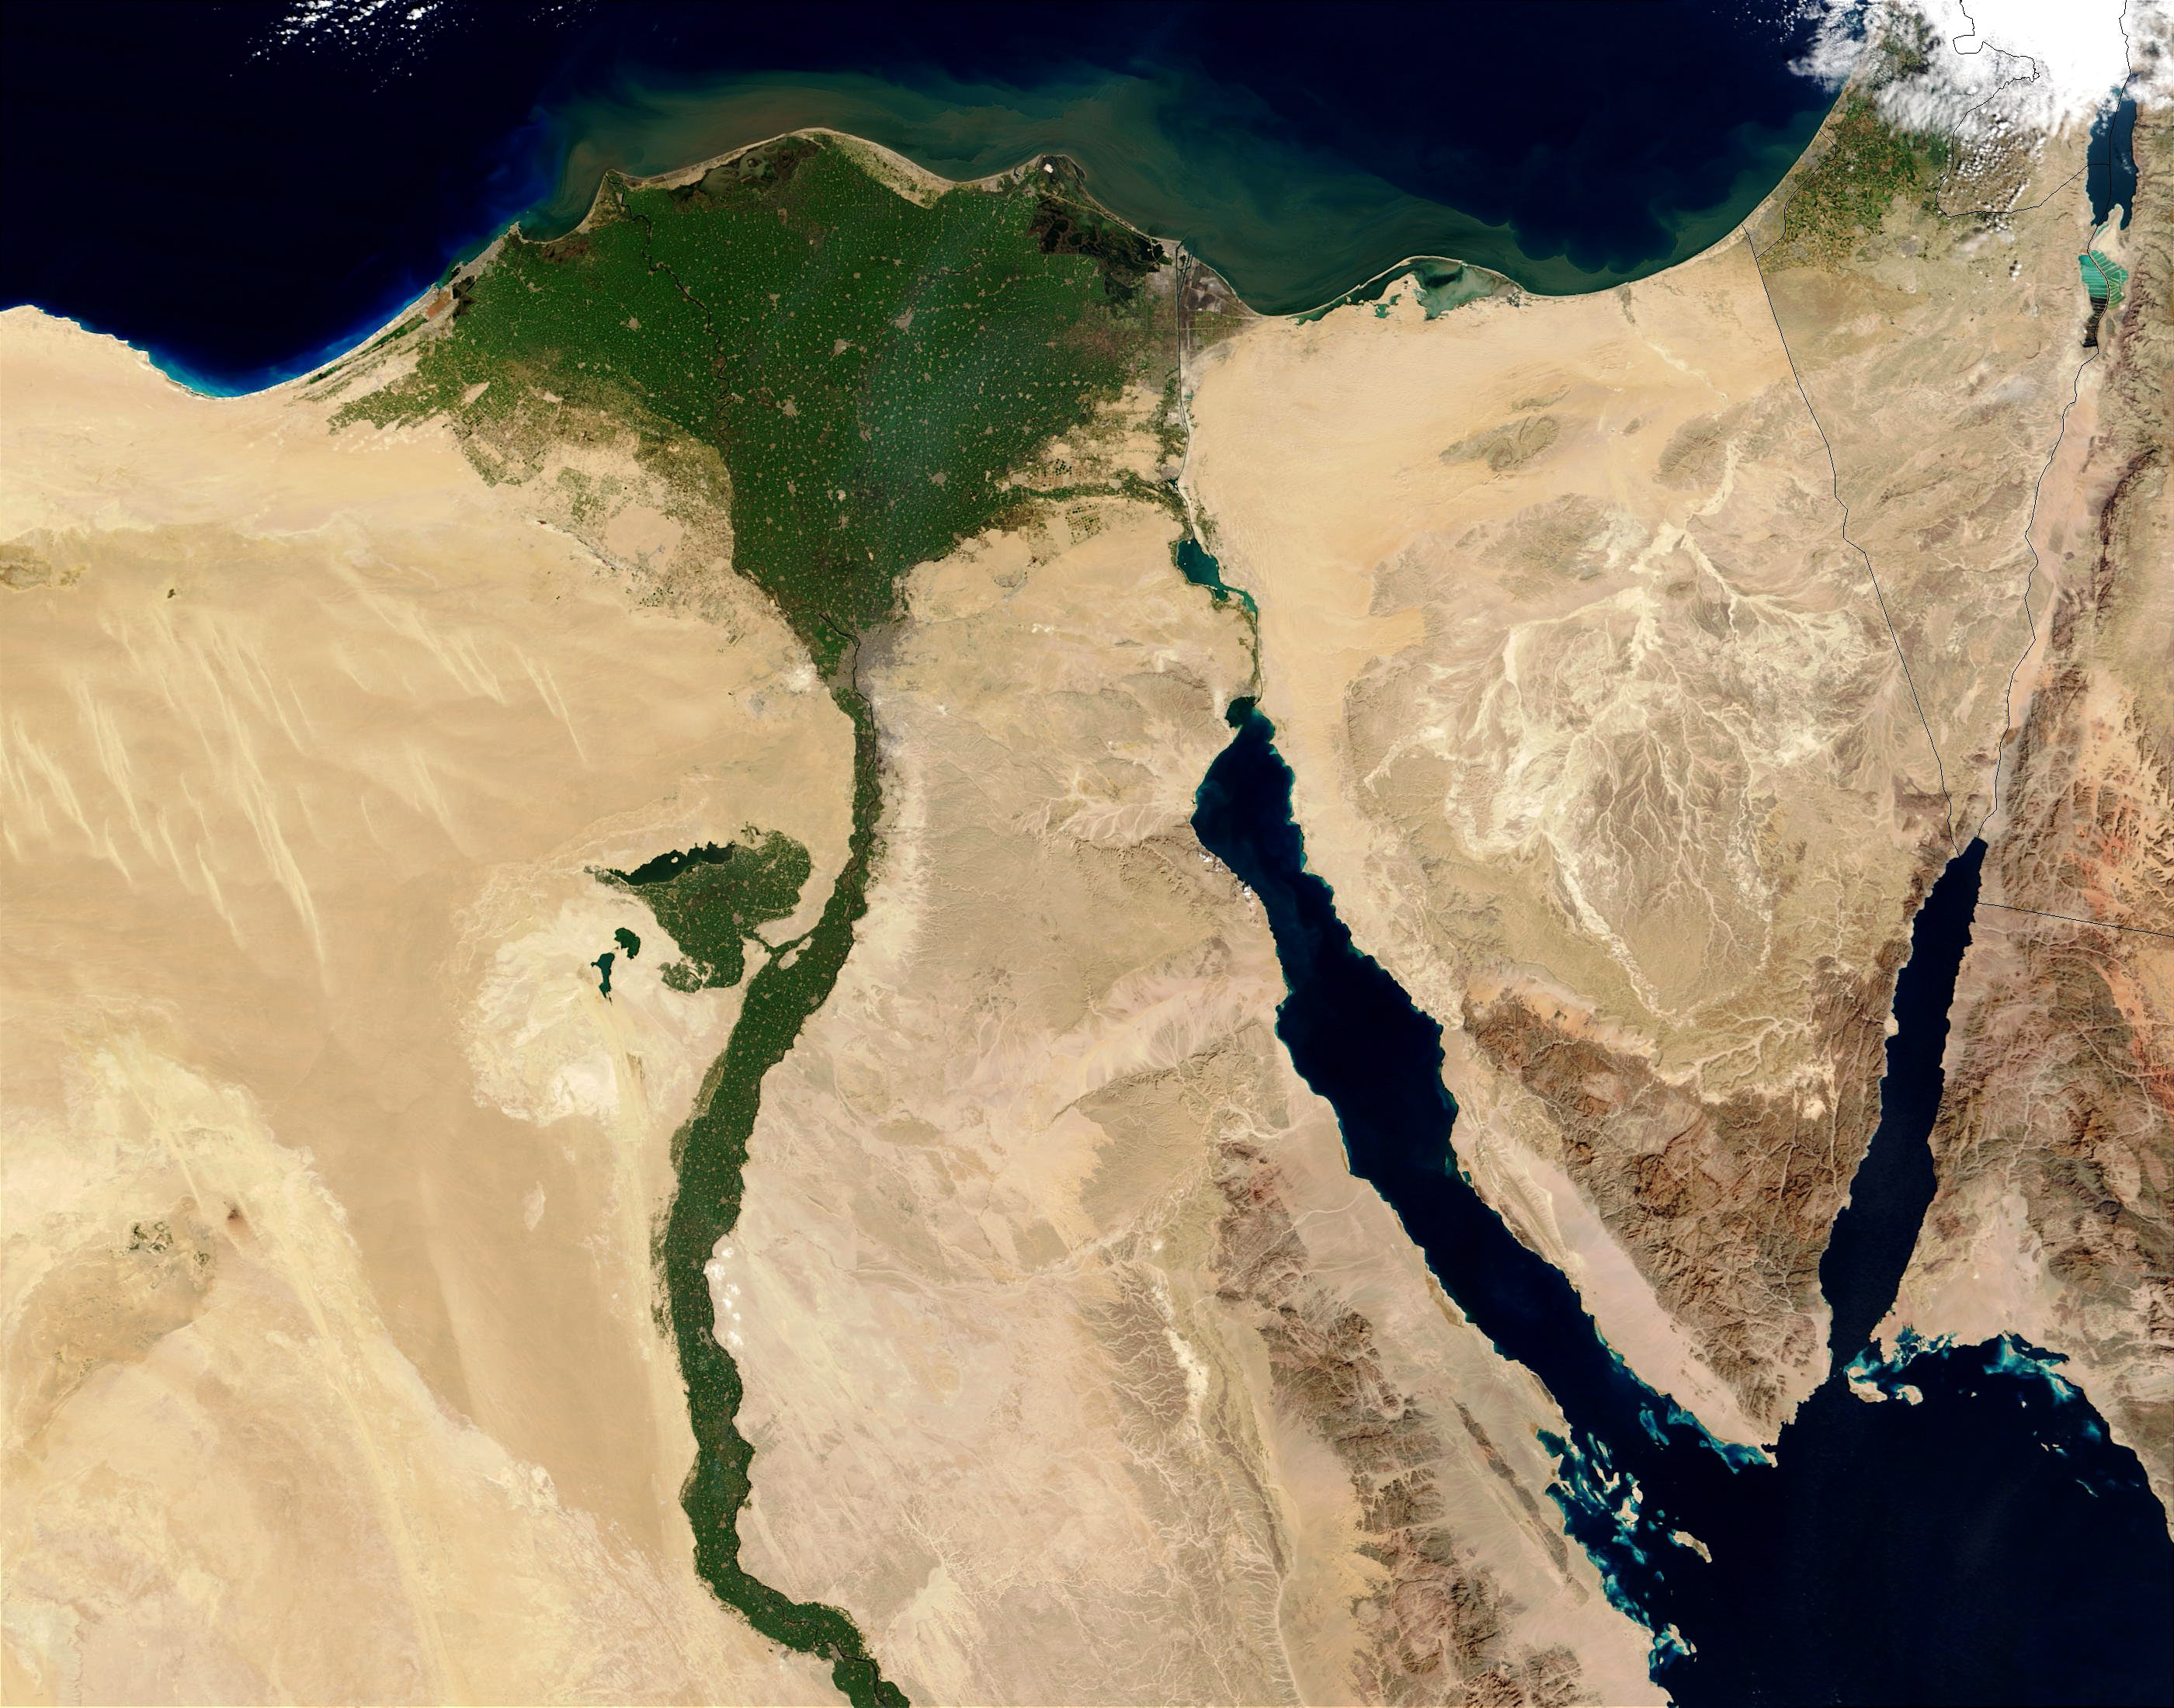 Satellite image of the Nile delta in Egypt